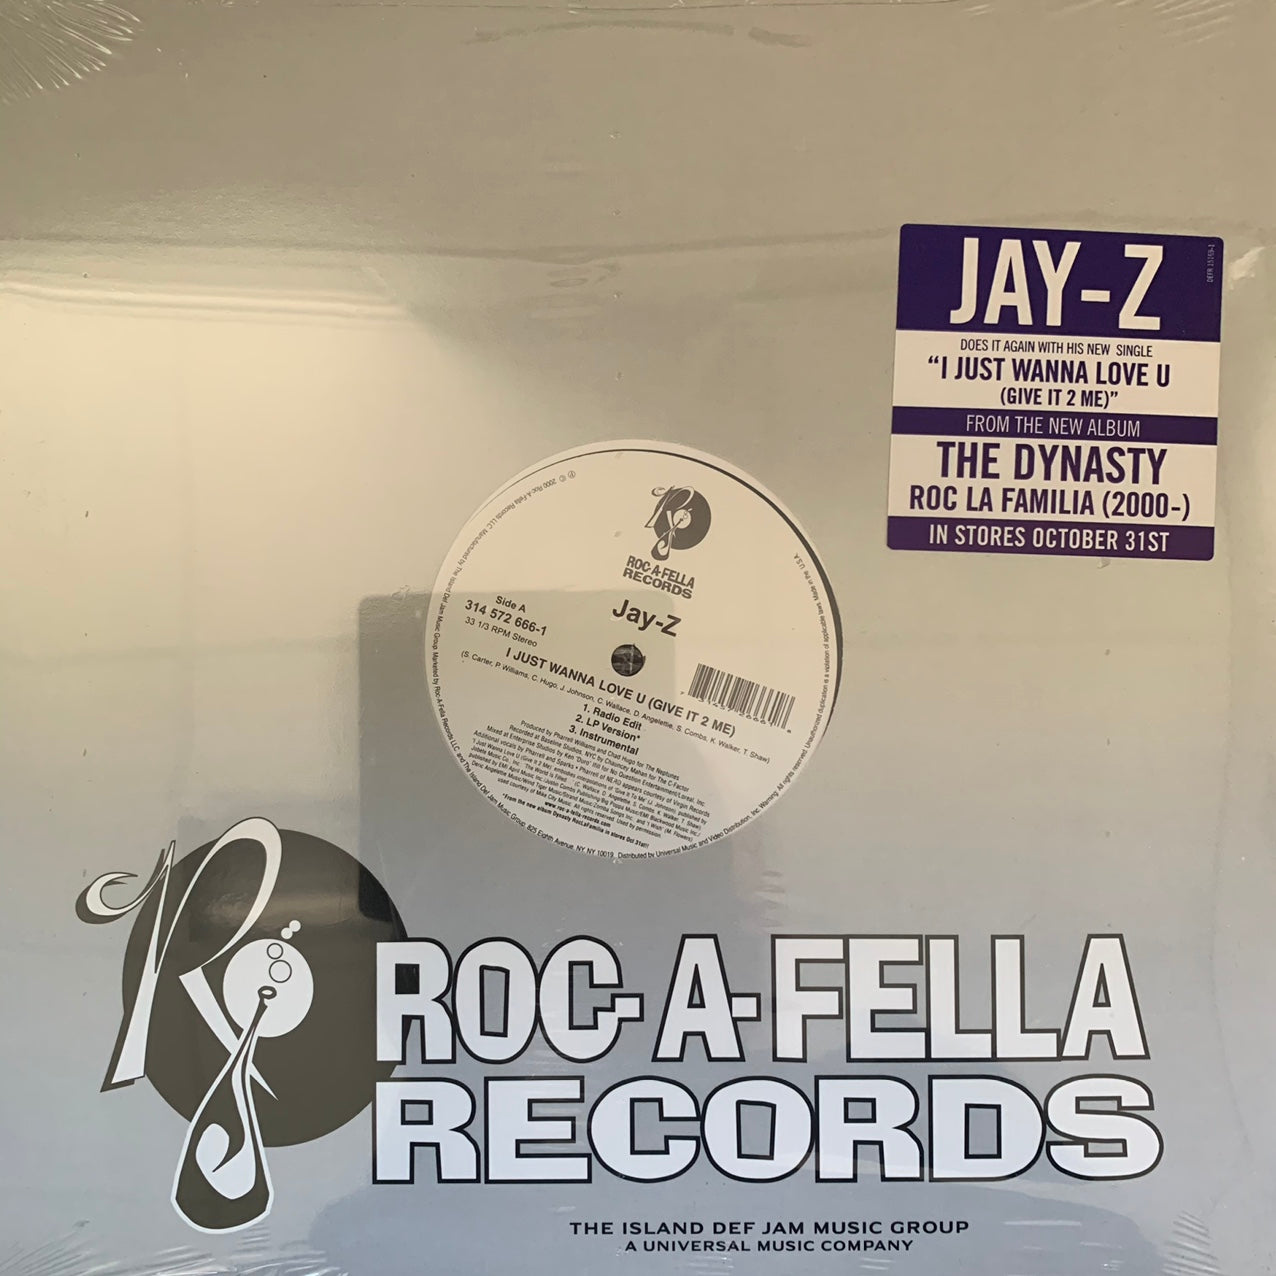 Jay-Z “I Just Wanna Love U ( Give It 2 Me )” Feat Pharrell / “Parking Lot Pimpin” 6 Version Factory Sealed 12inch Vinyl